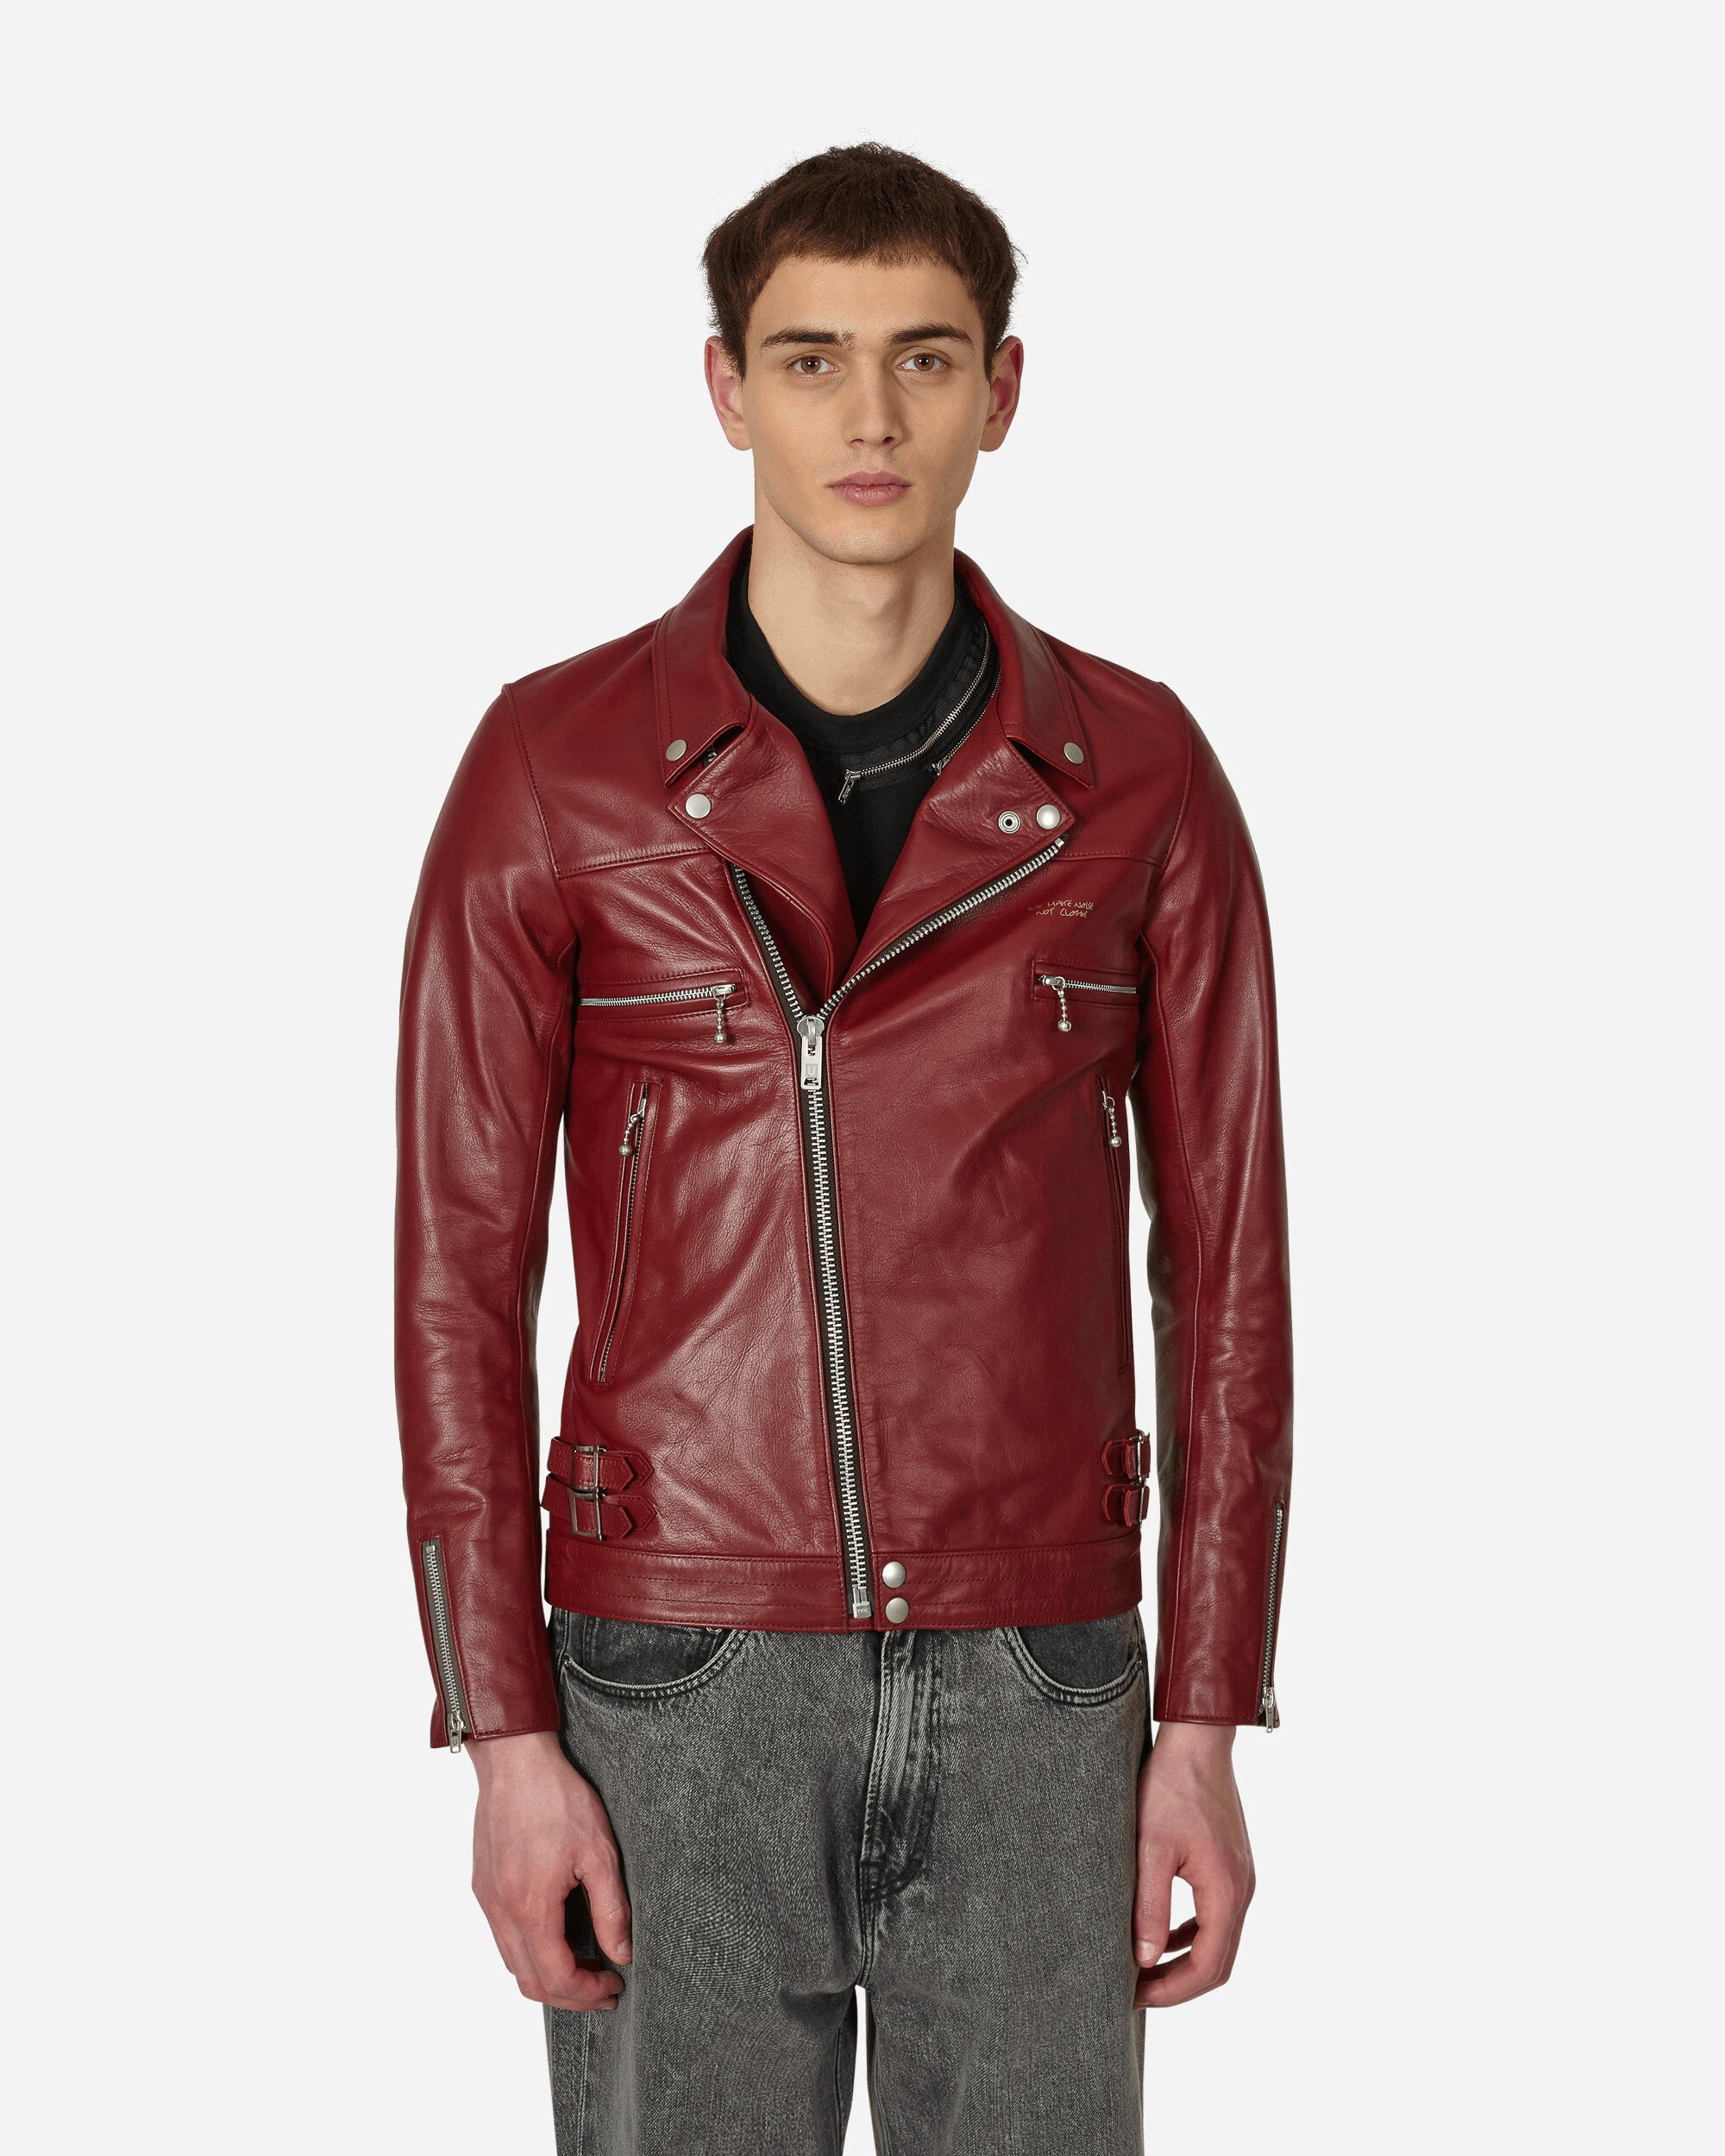 Undercover Rider Jacket BORDEAUX Coats and Jackets Leather Jackets UC2B9206-1 002